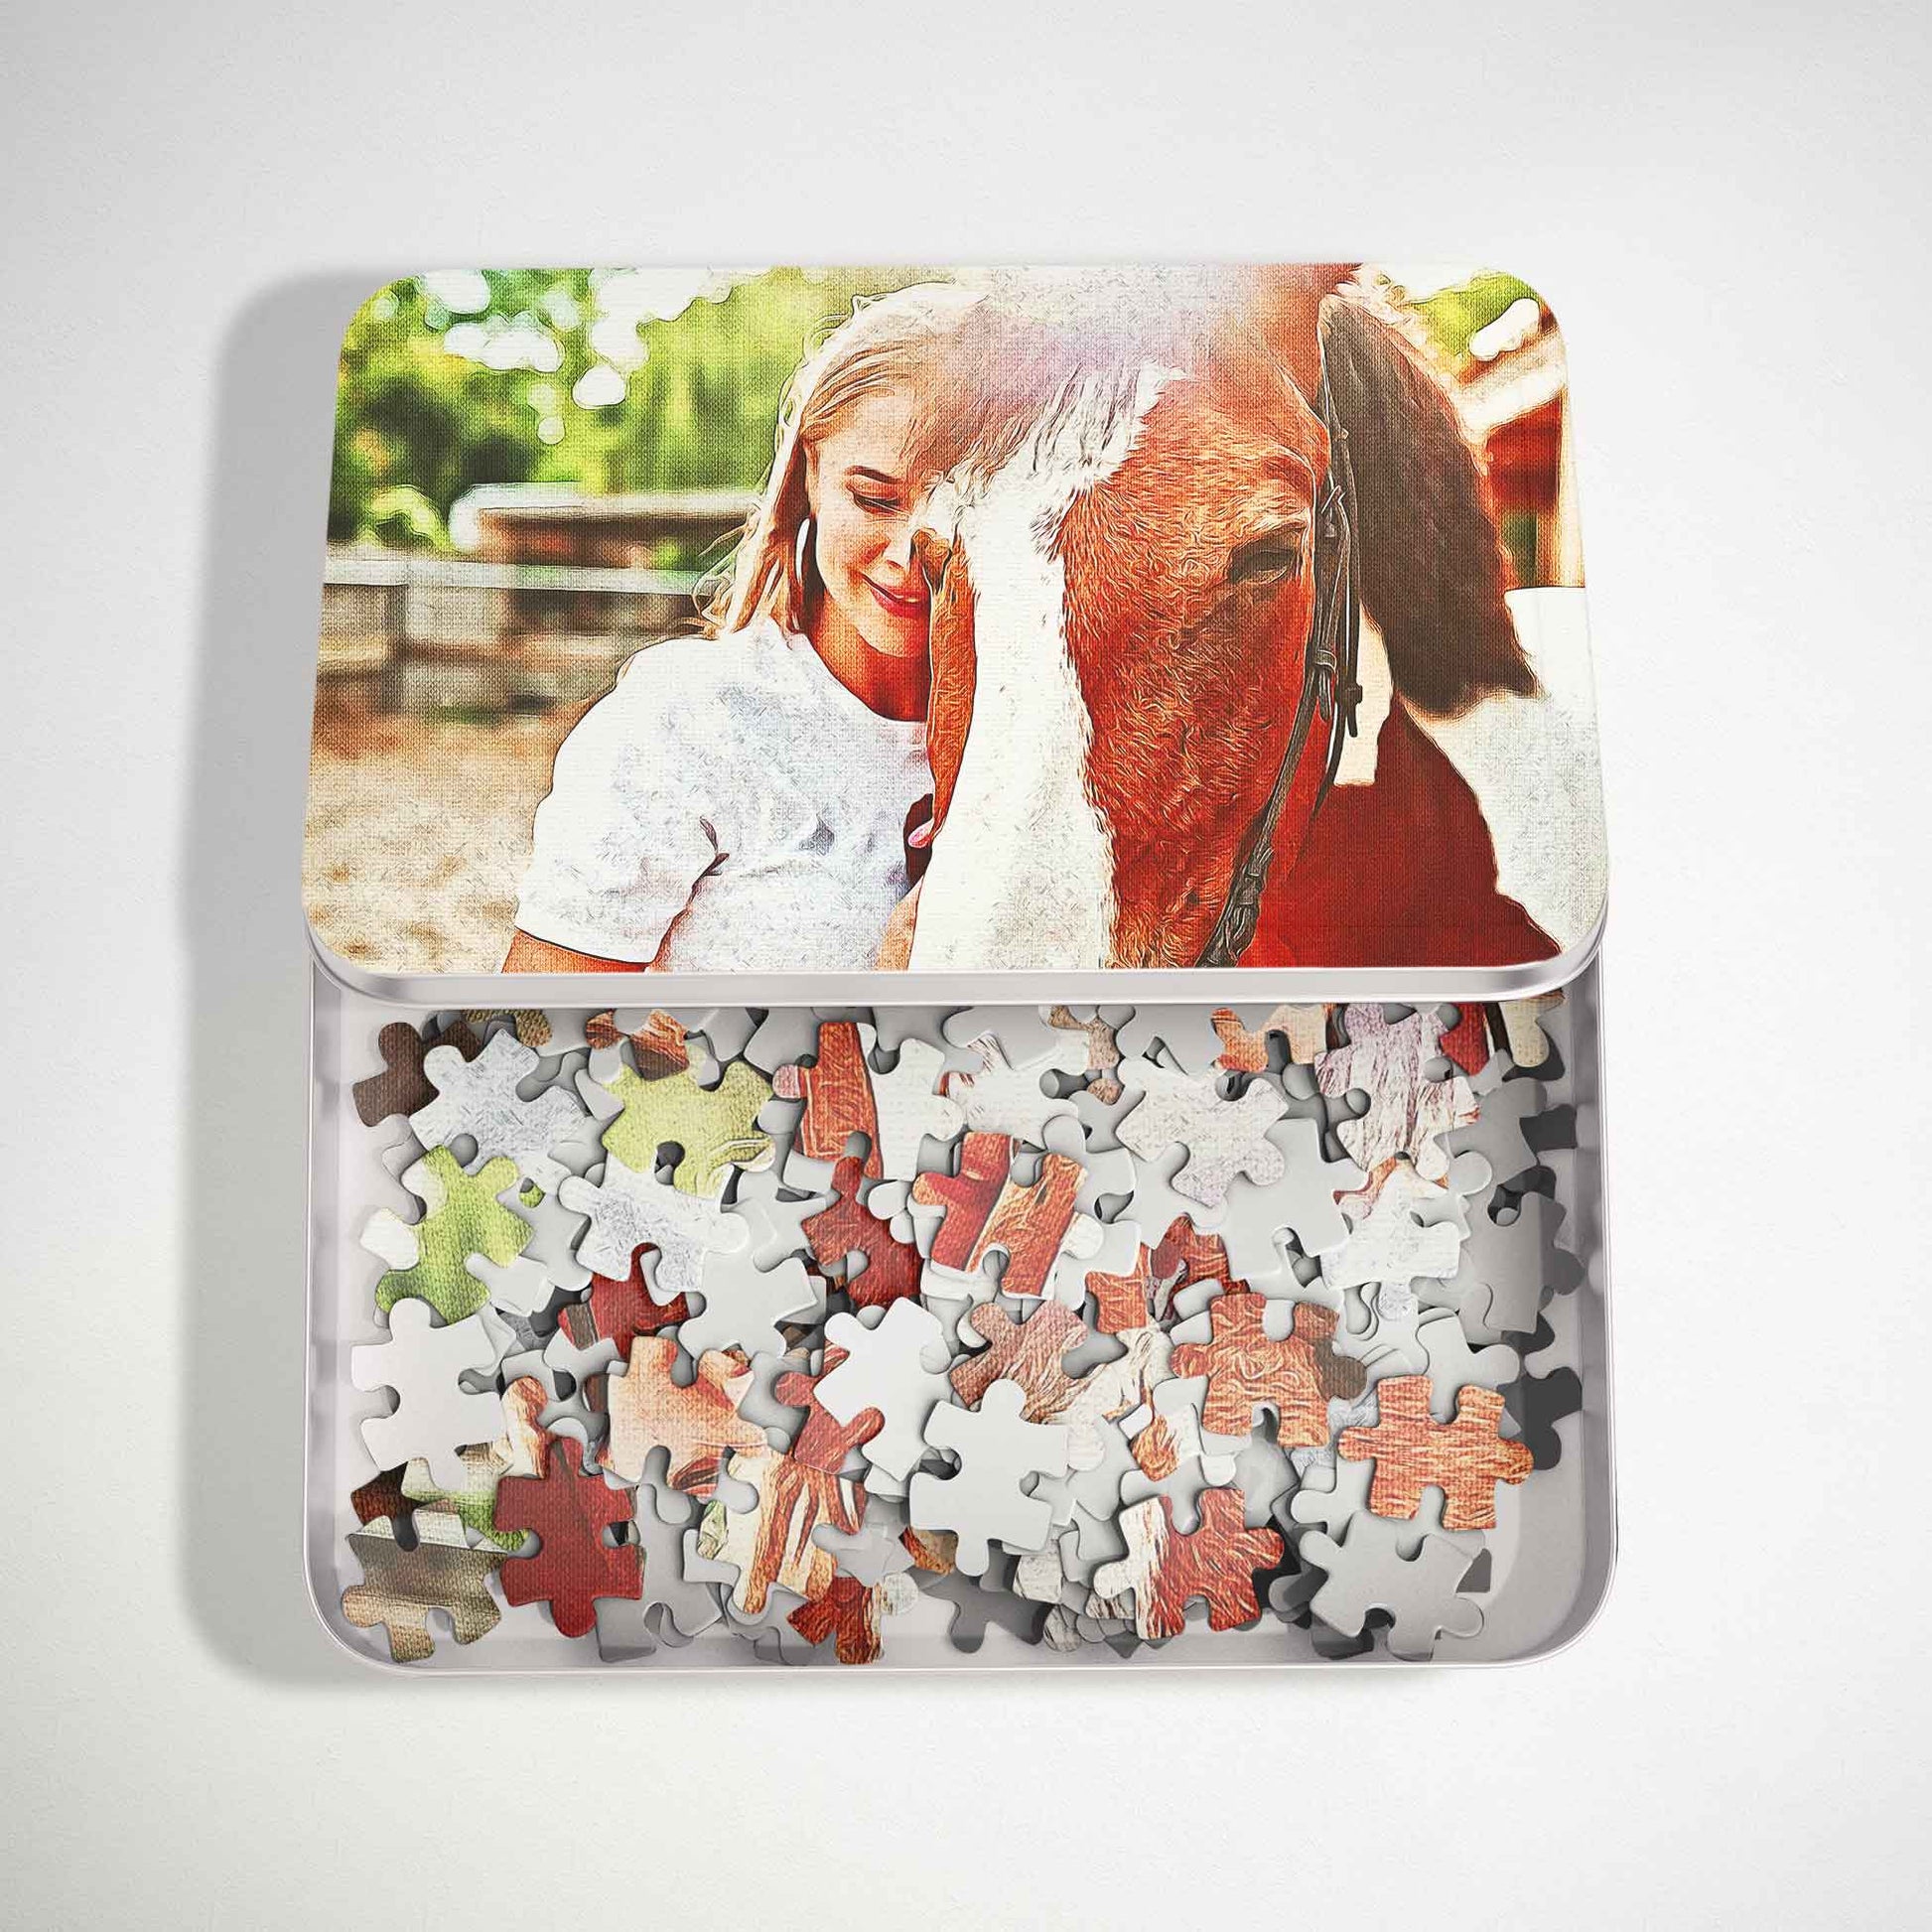 Indulge in the sophistication of a traditional art effect with our Elegant Artistic Oil Painting Jigsaw Puzzle. This handmade photo puzzle is a unique gift that speaks volumes about your thoughtfulness